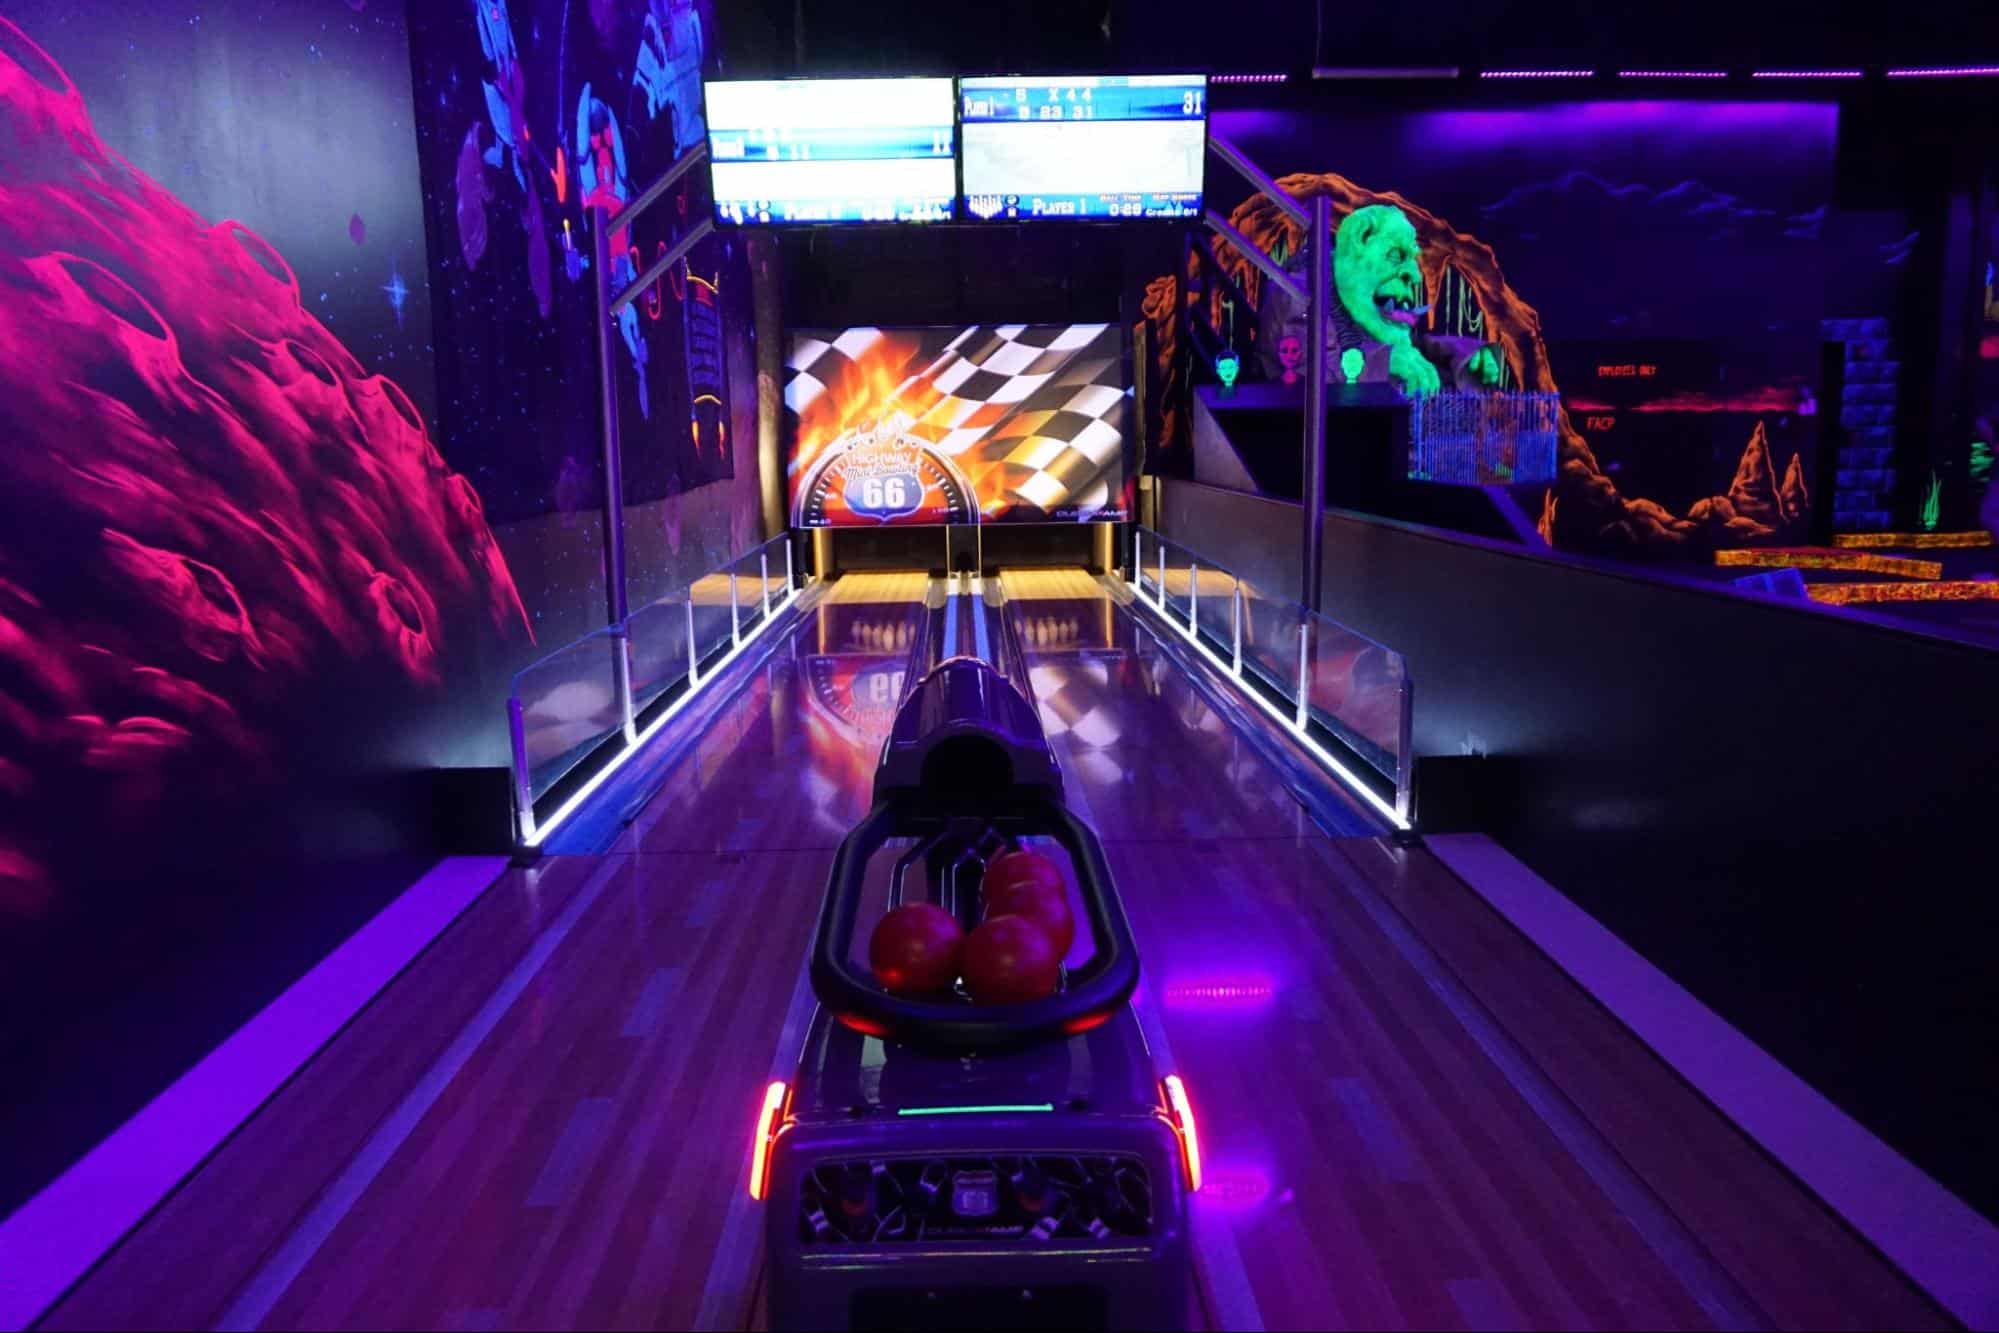 Glow-in-the-dark mini bowling lanes with mini bowling balls at Monster Mini Golf.